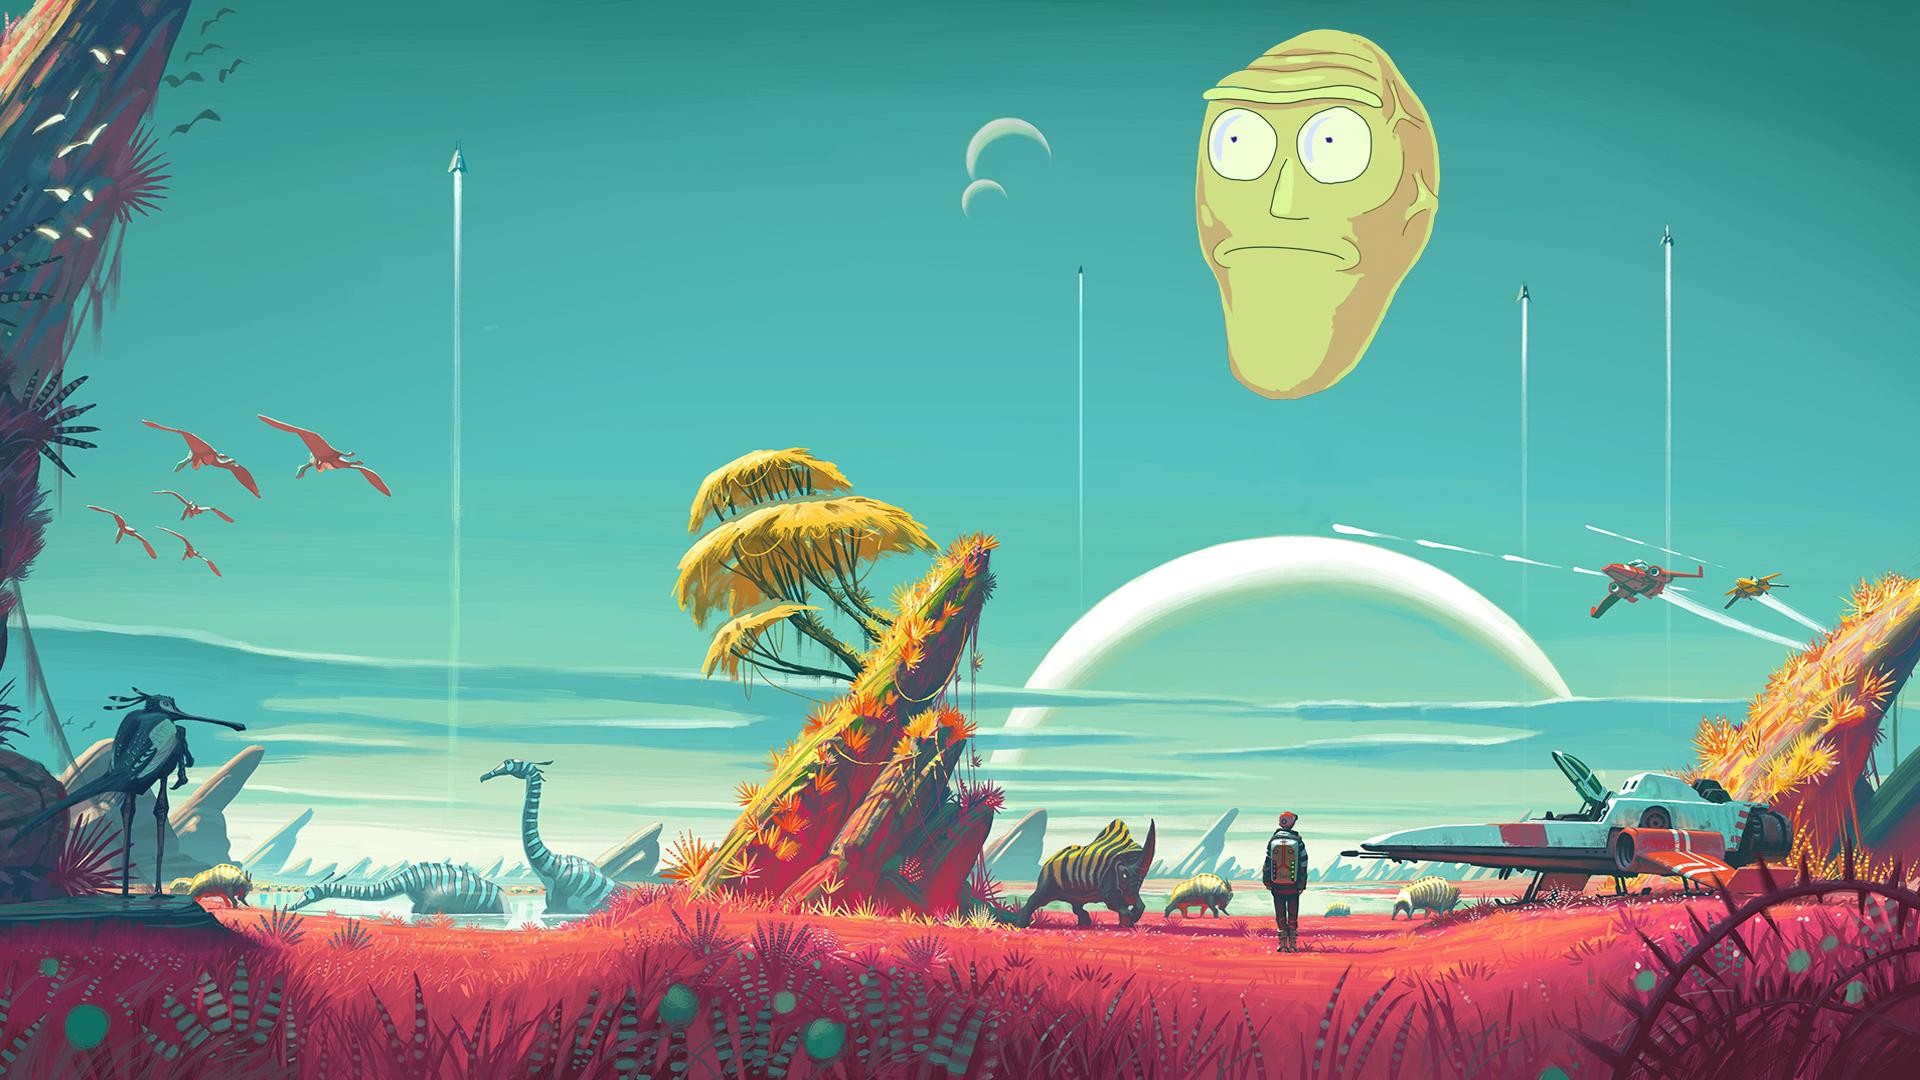 General 1920x1080 fan art Rick and Morty No Man's Sky humor floating heads crossover